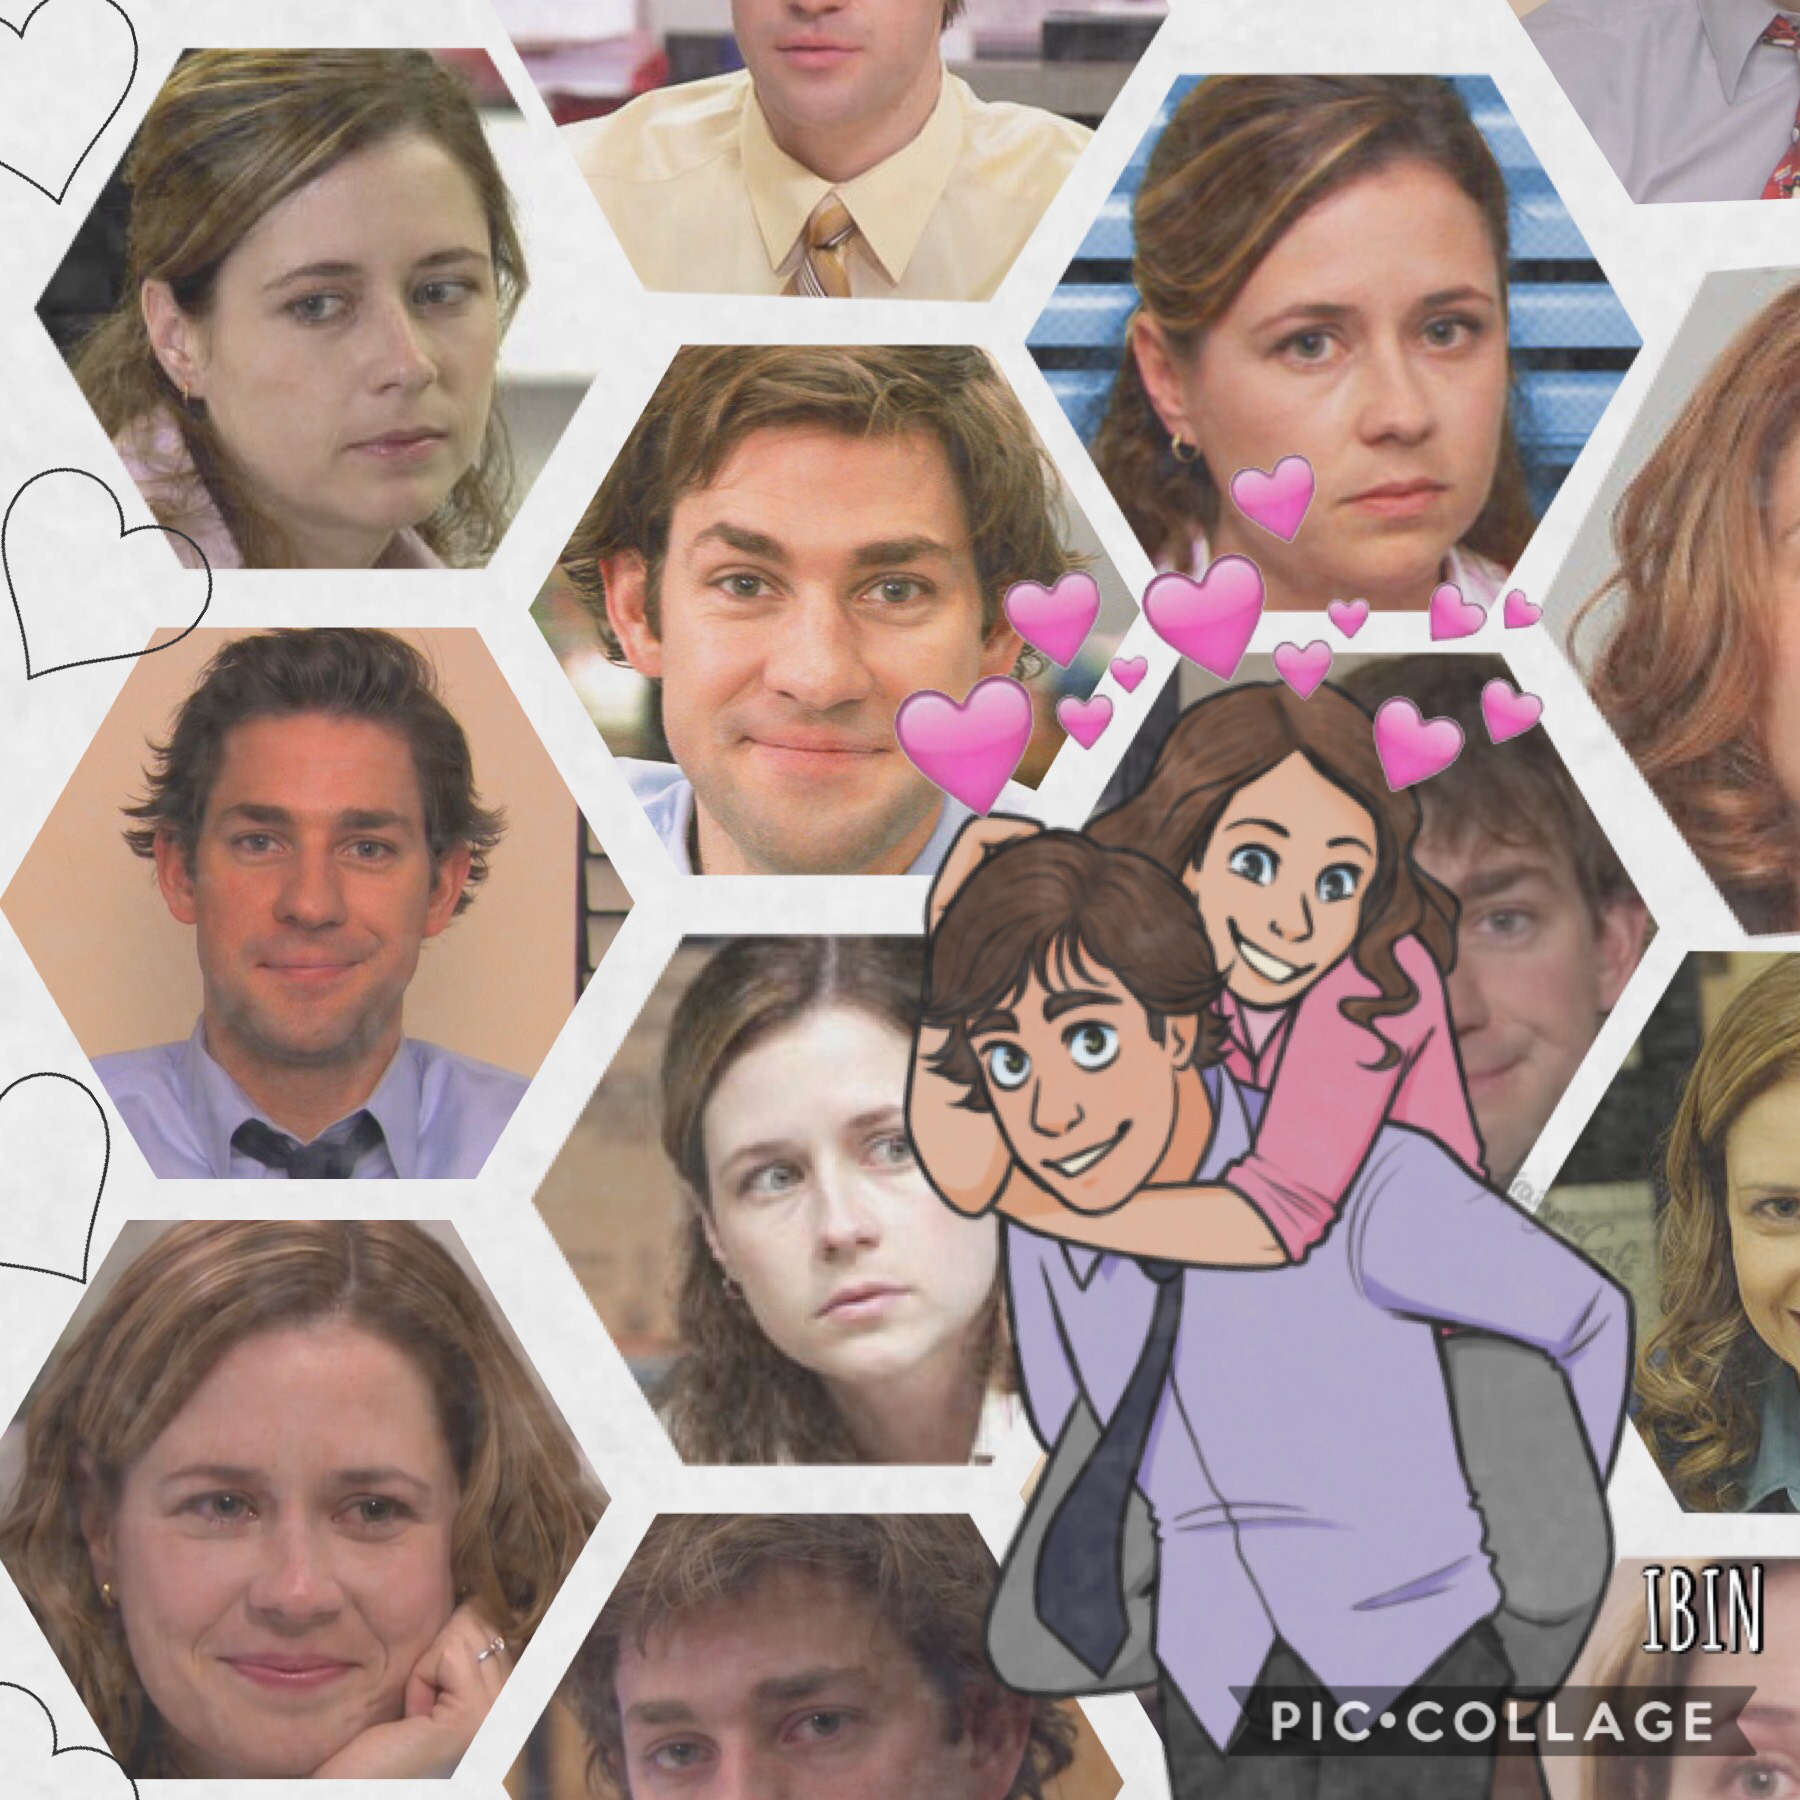 PB&J
fact: Pam Beasley and Jim Halpert have the same number of letters in each name, ex. Pam (3) Jim (3)
COINCIDENCE? I THINK NOT!
Bears, beets, Battlestar Galactica